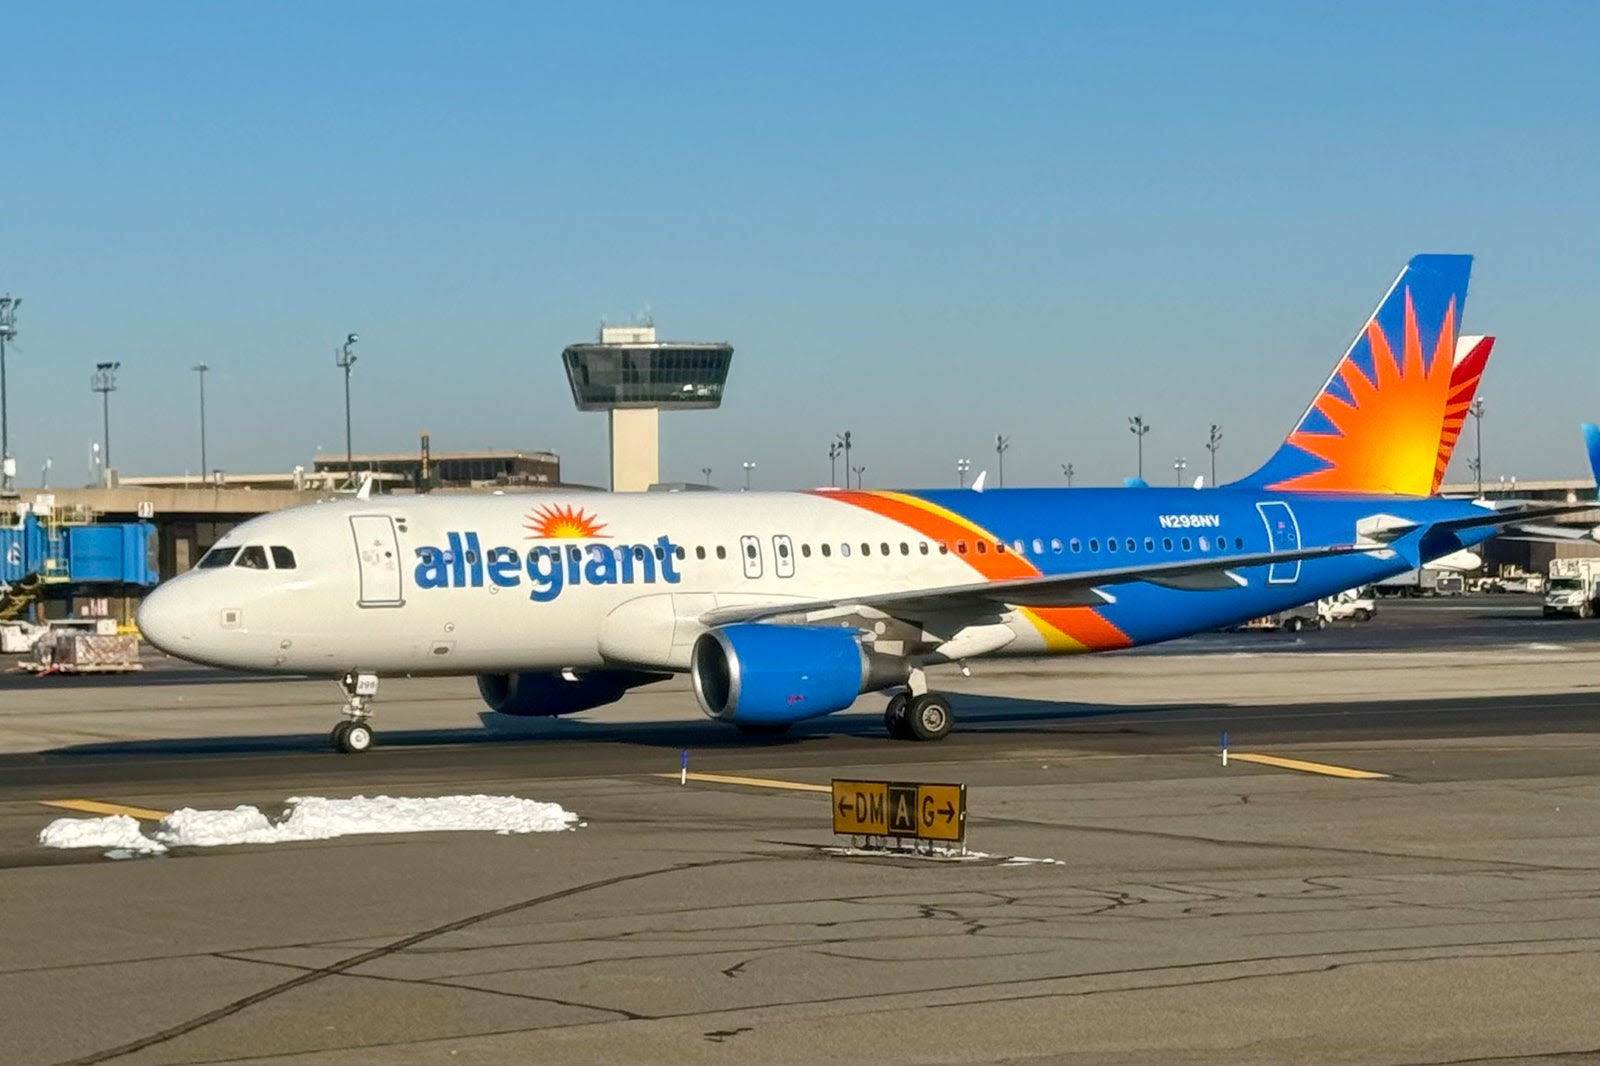 Allegiant unveils 8 new routes across 13 cities - The Points Guy